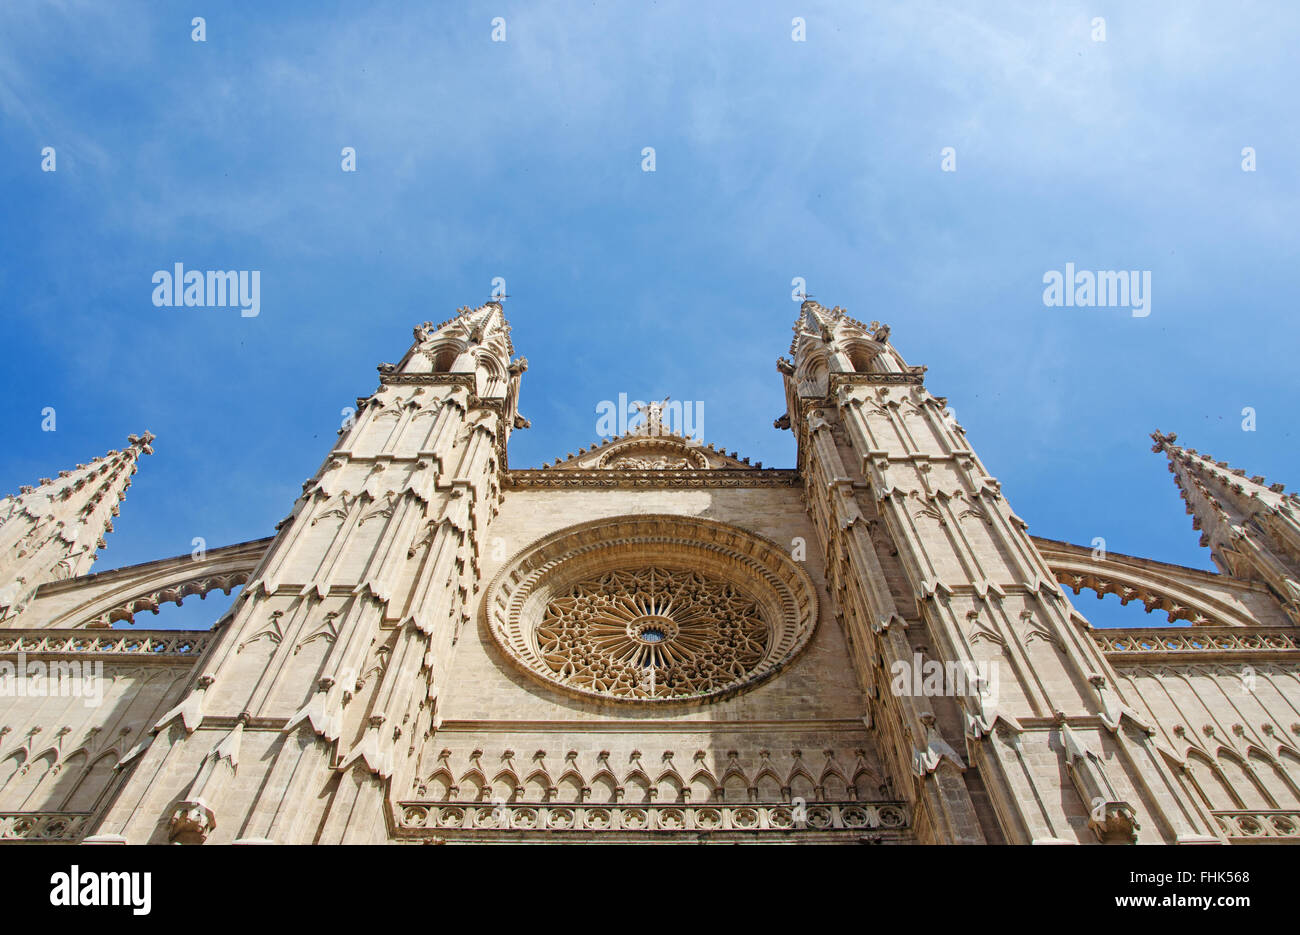 Mallorca, Balearic Islands, Spain: details of La Seu Cathedral, the Cathedral of Santa Maria of Palma, a Gothic Roman church finished in 1601 Stock Photo